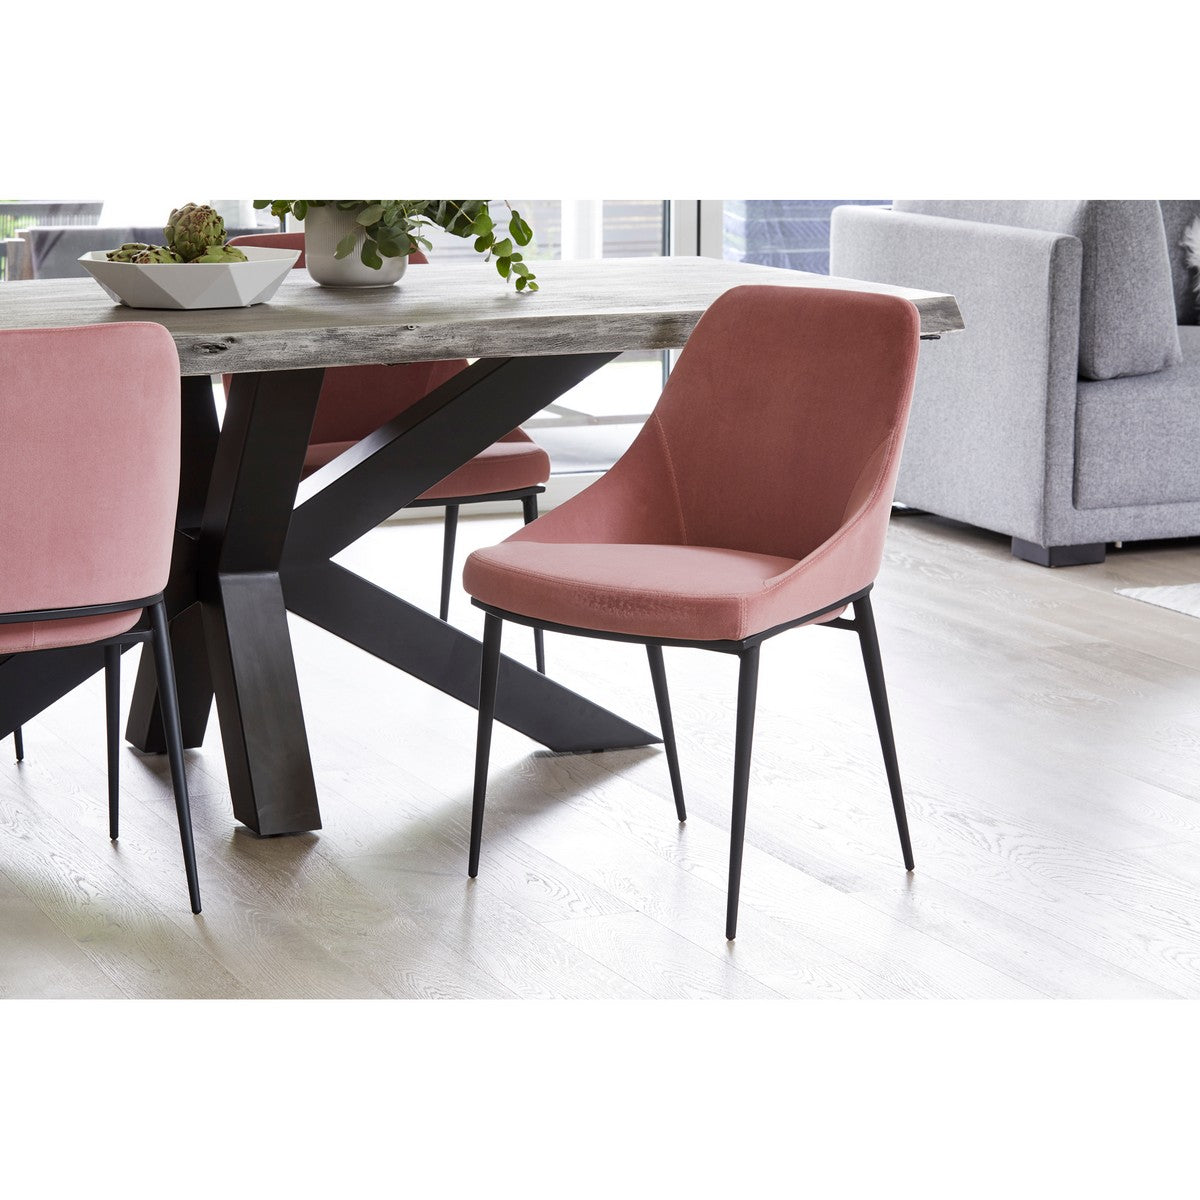 Moe's Home Collection Sedona Dining Chair Pink Velvet-Set of Two - EJ-1034-33 - Moe's Home Collection - Dining Chairs - Minimal And Modern - 1